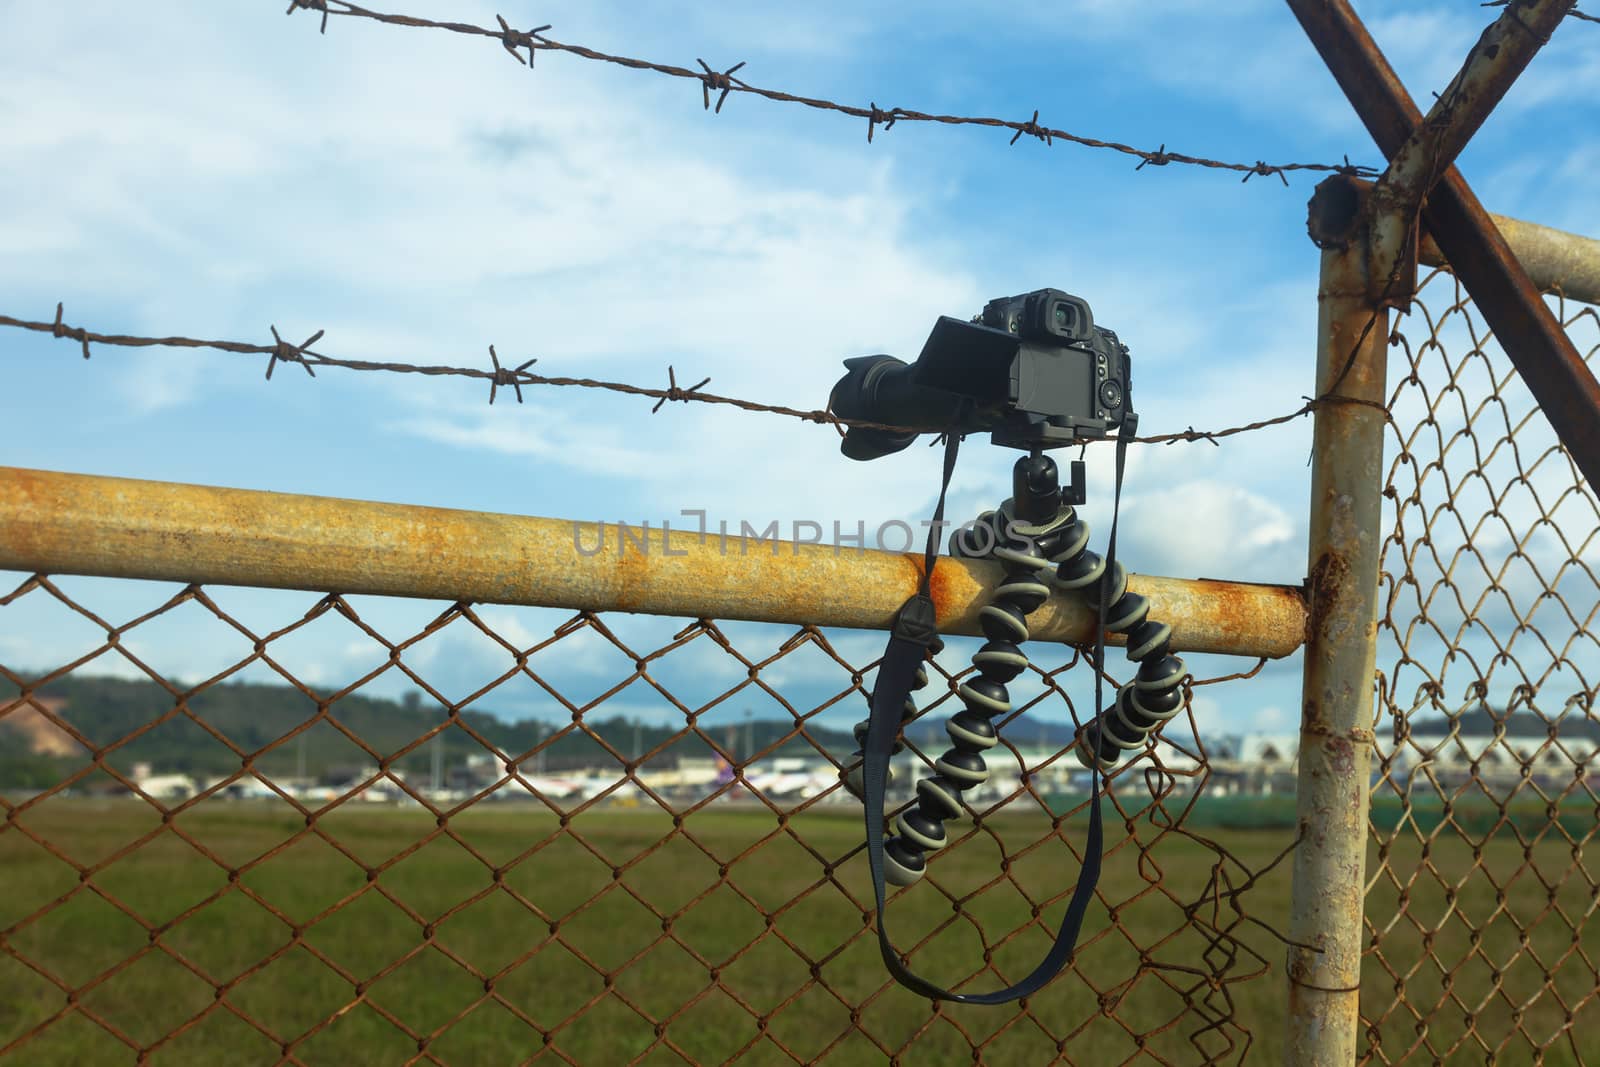 Camera on the fence shooting airplane takeoff